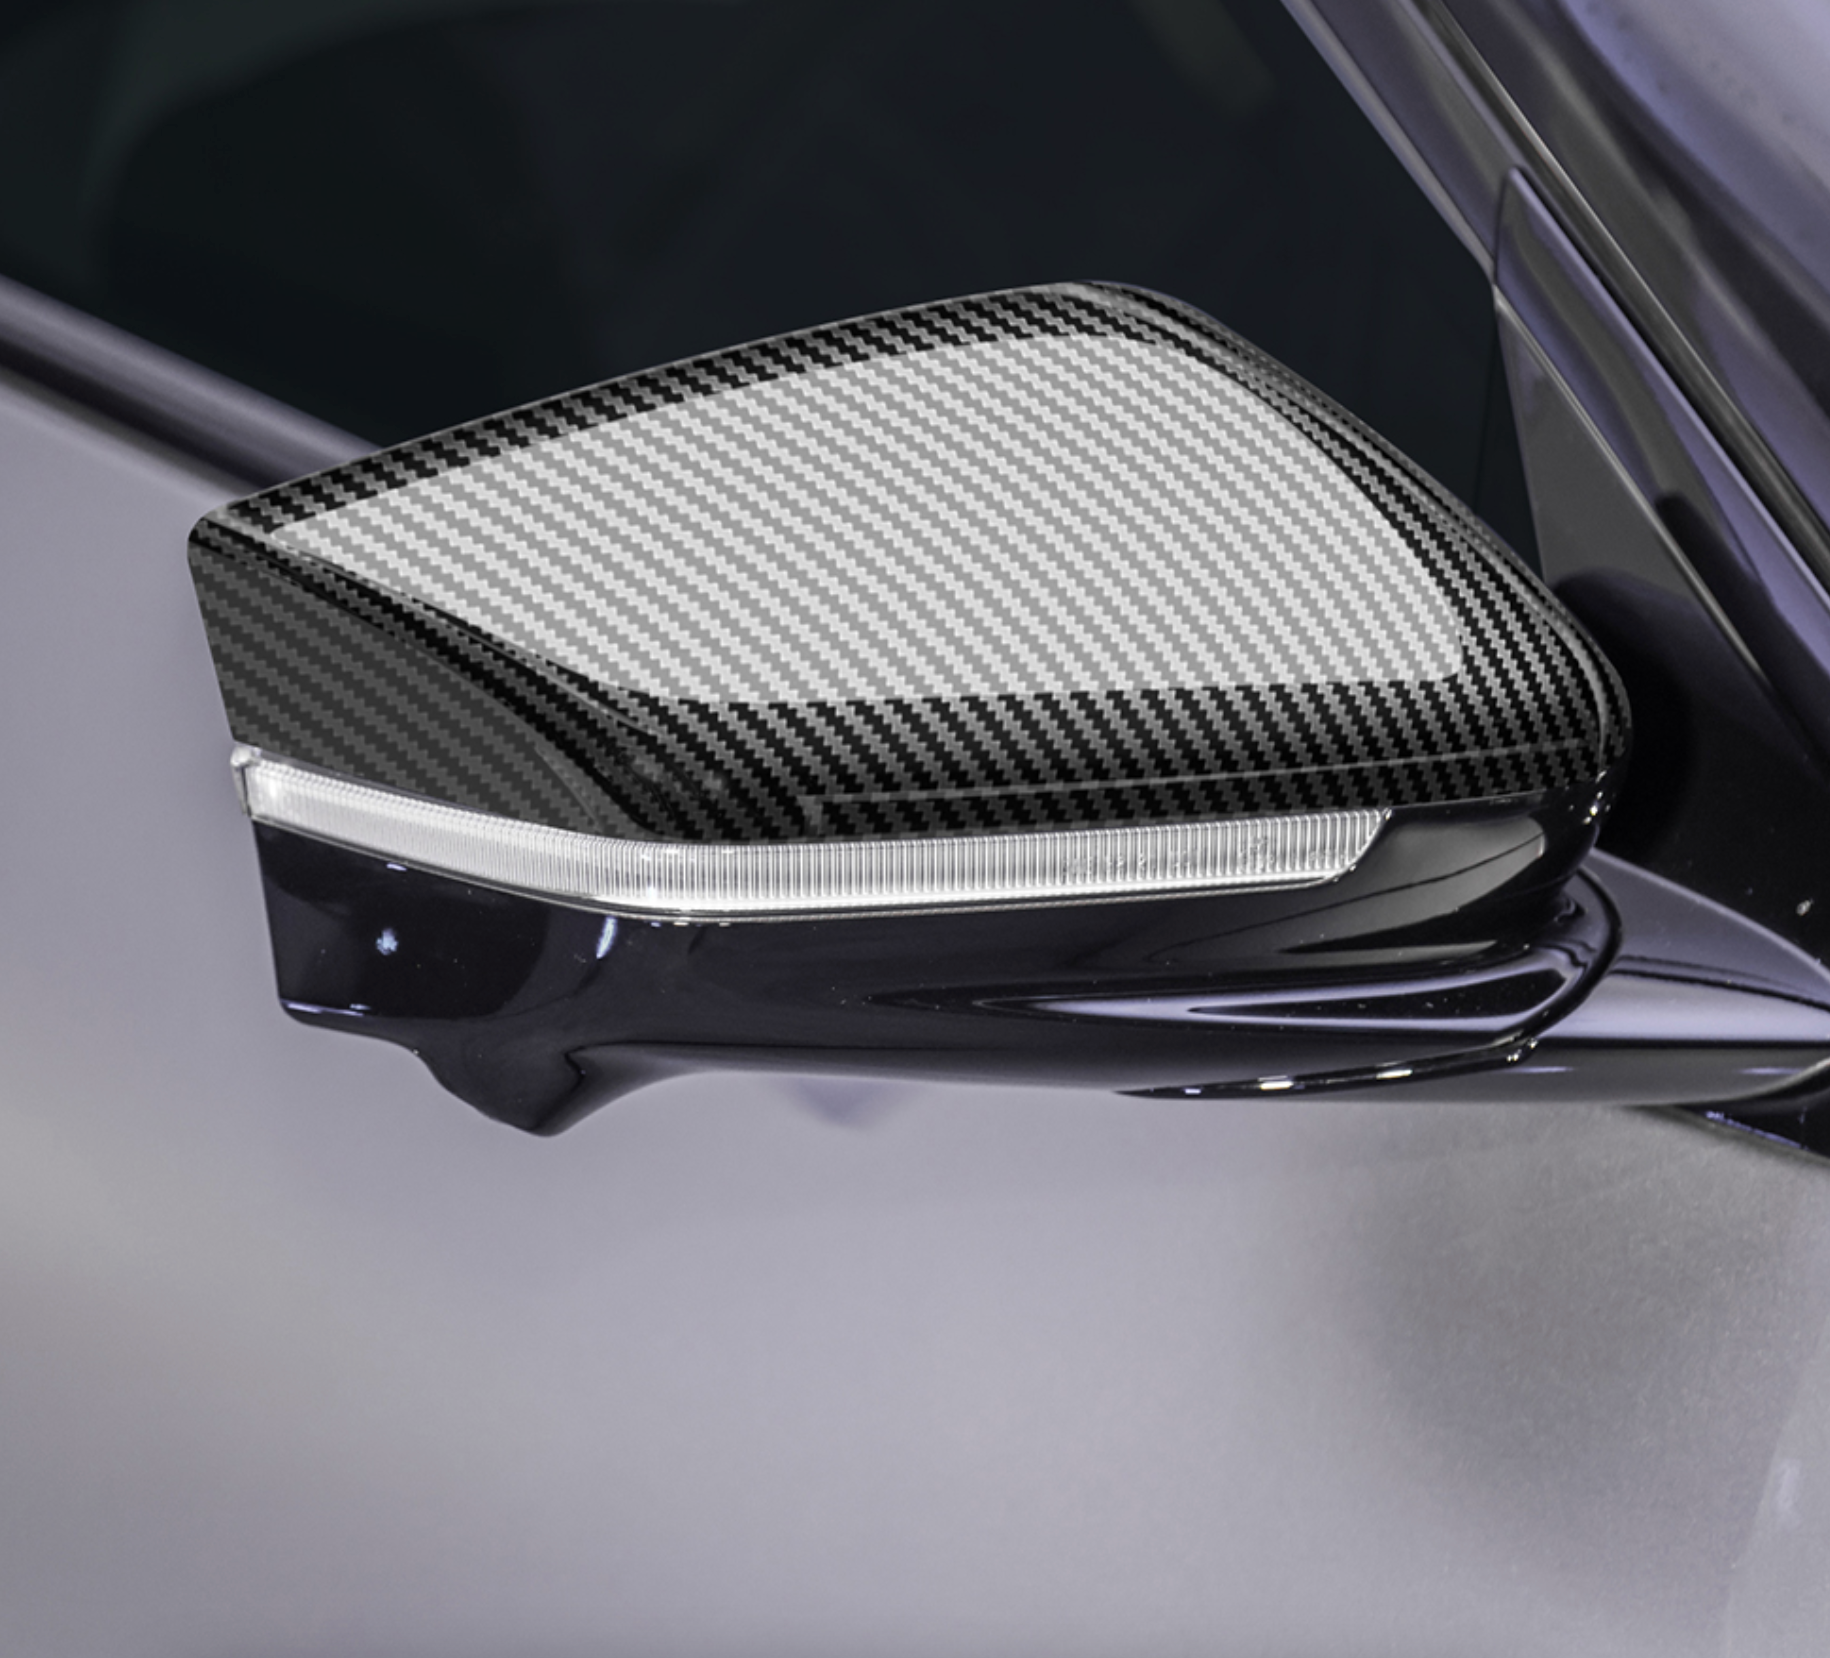 Carbon Fiber Side Mirror Covers